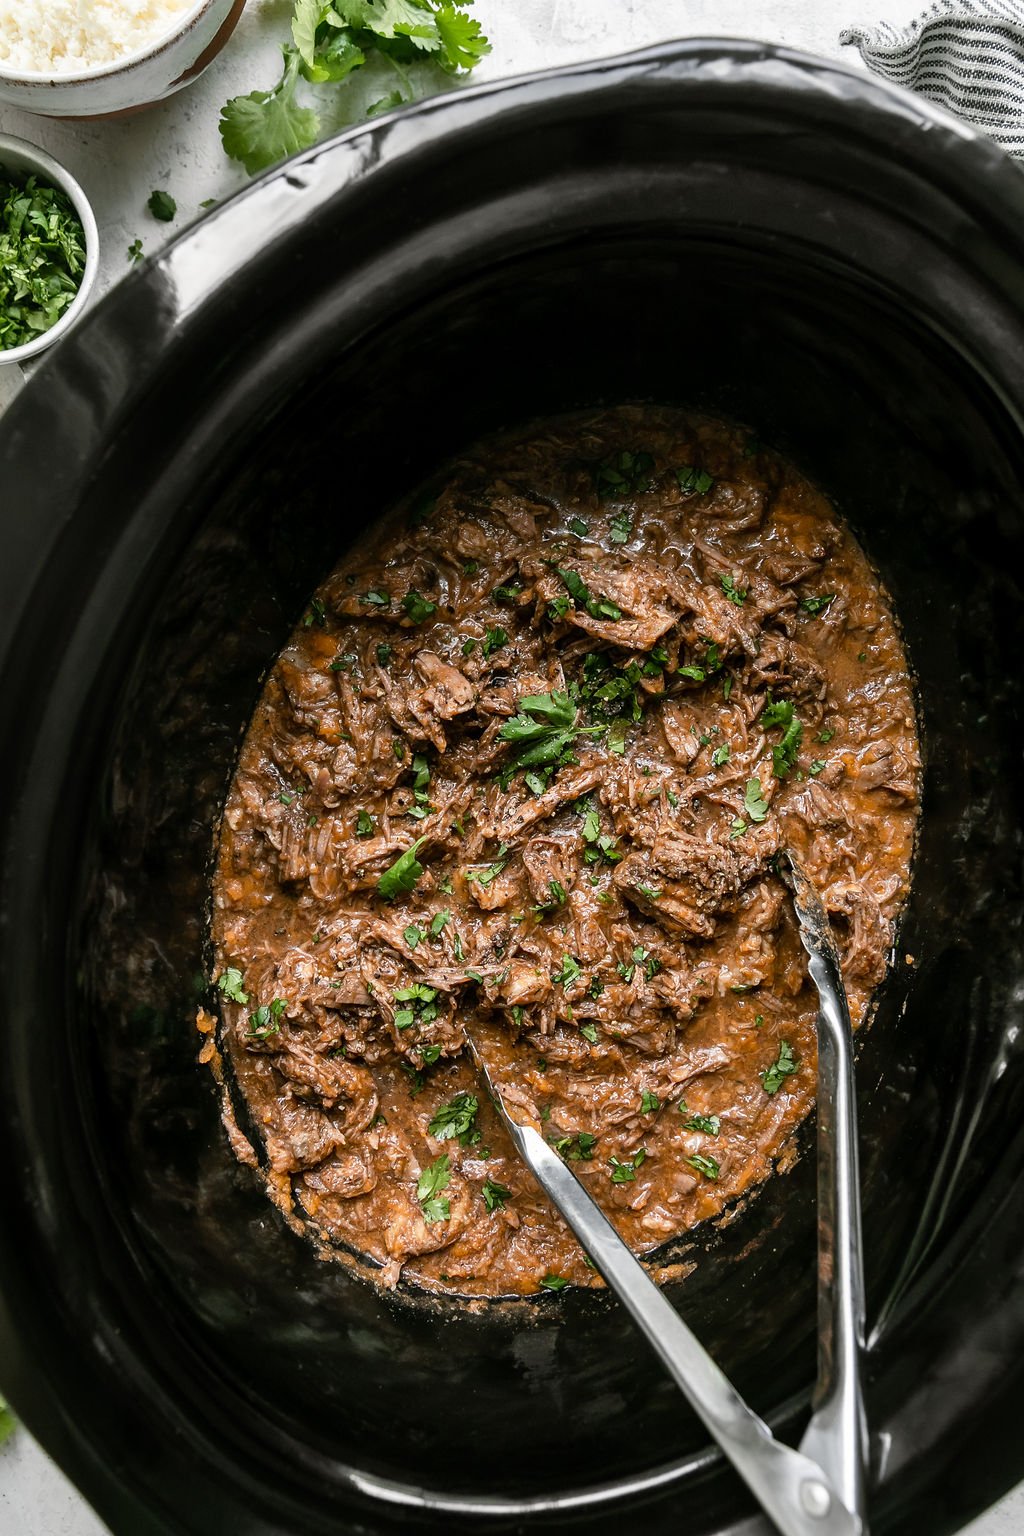 Shredded saucy beef barbacoa in black crockpot with tongs.